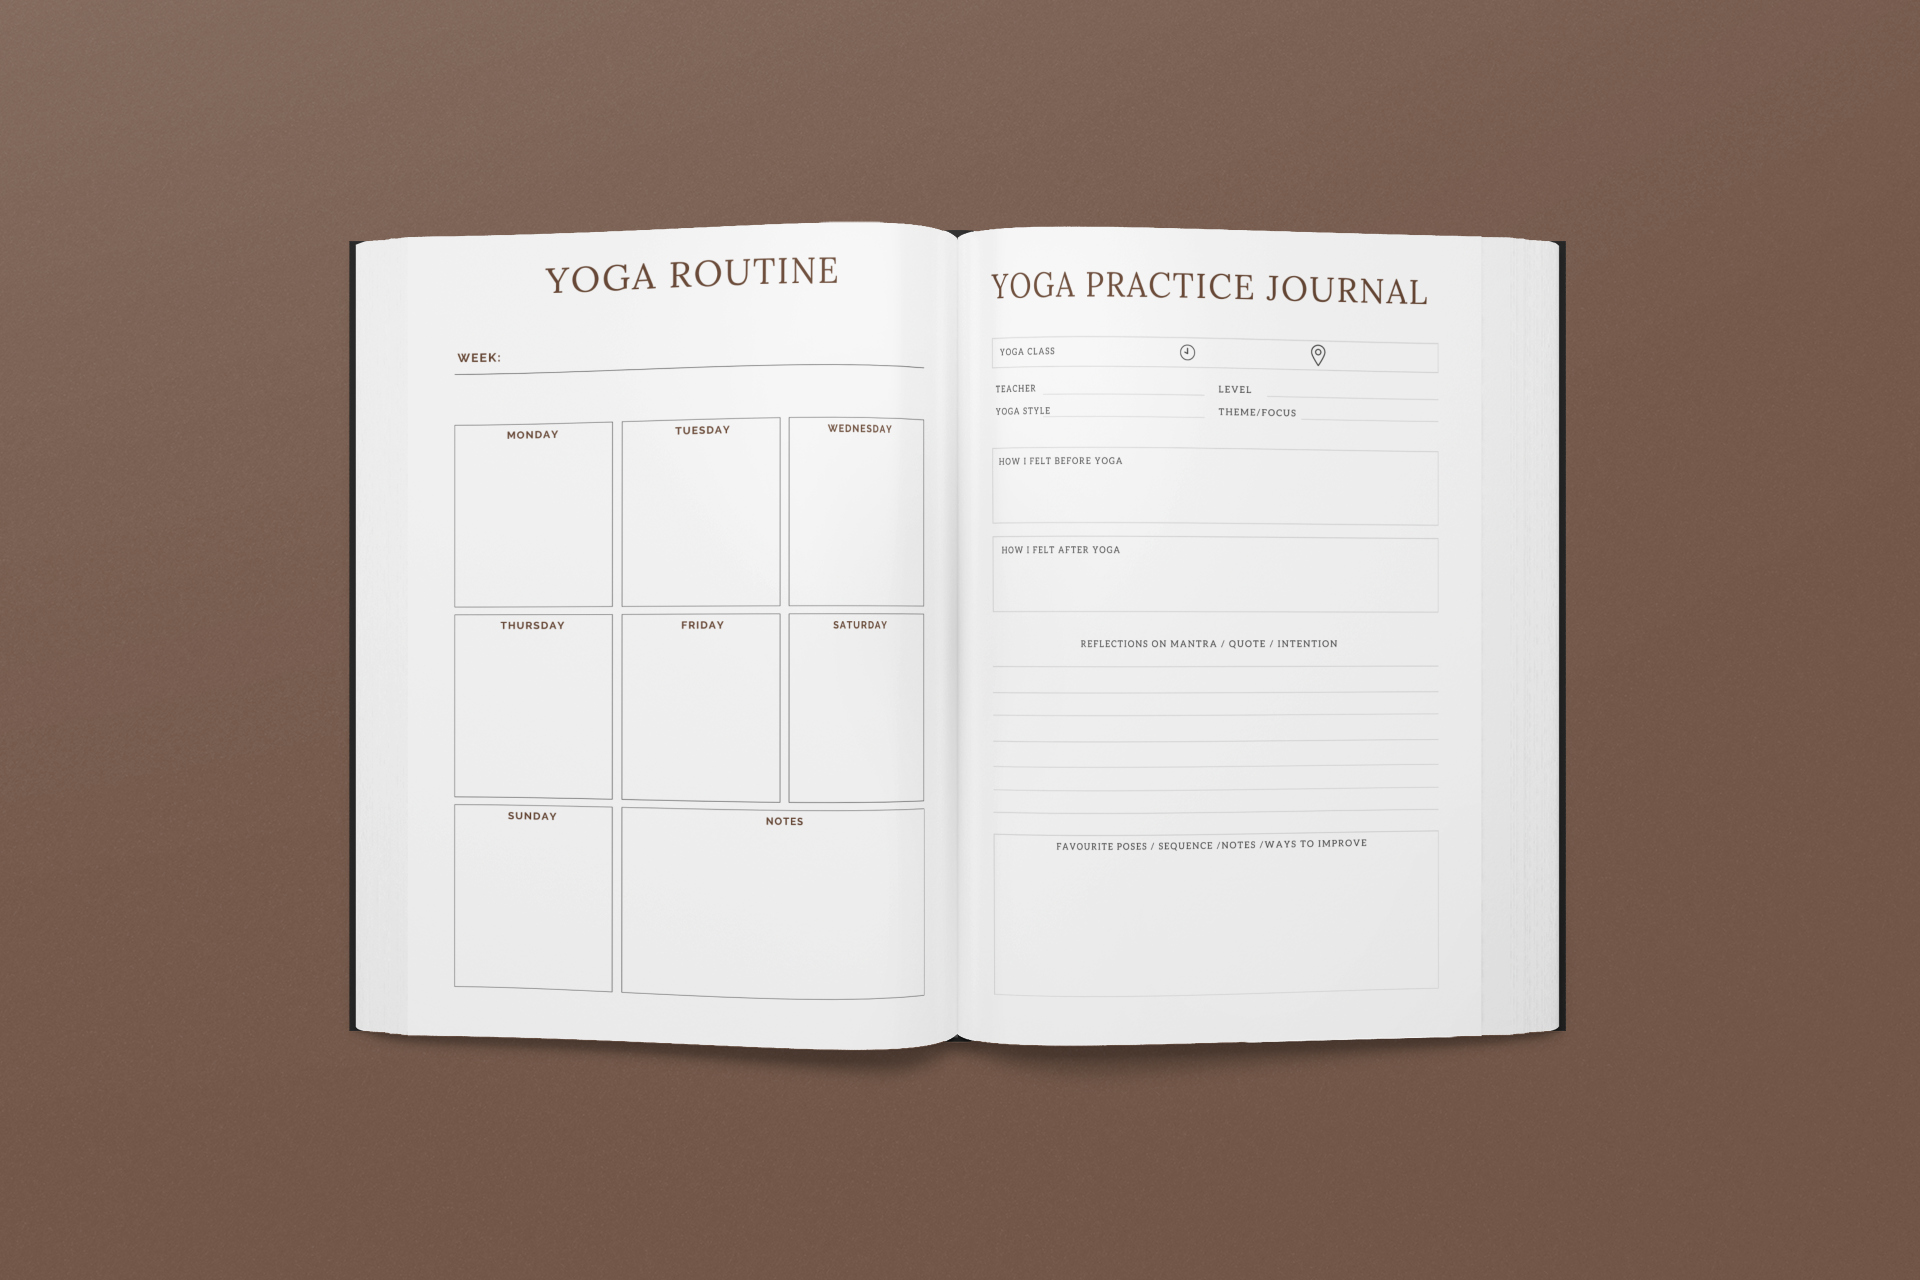 how to resell plr for yoga experts